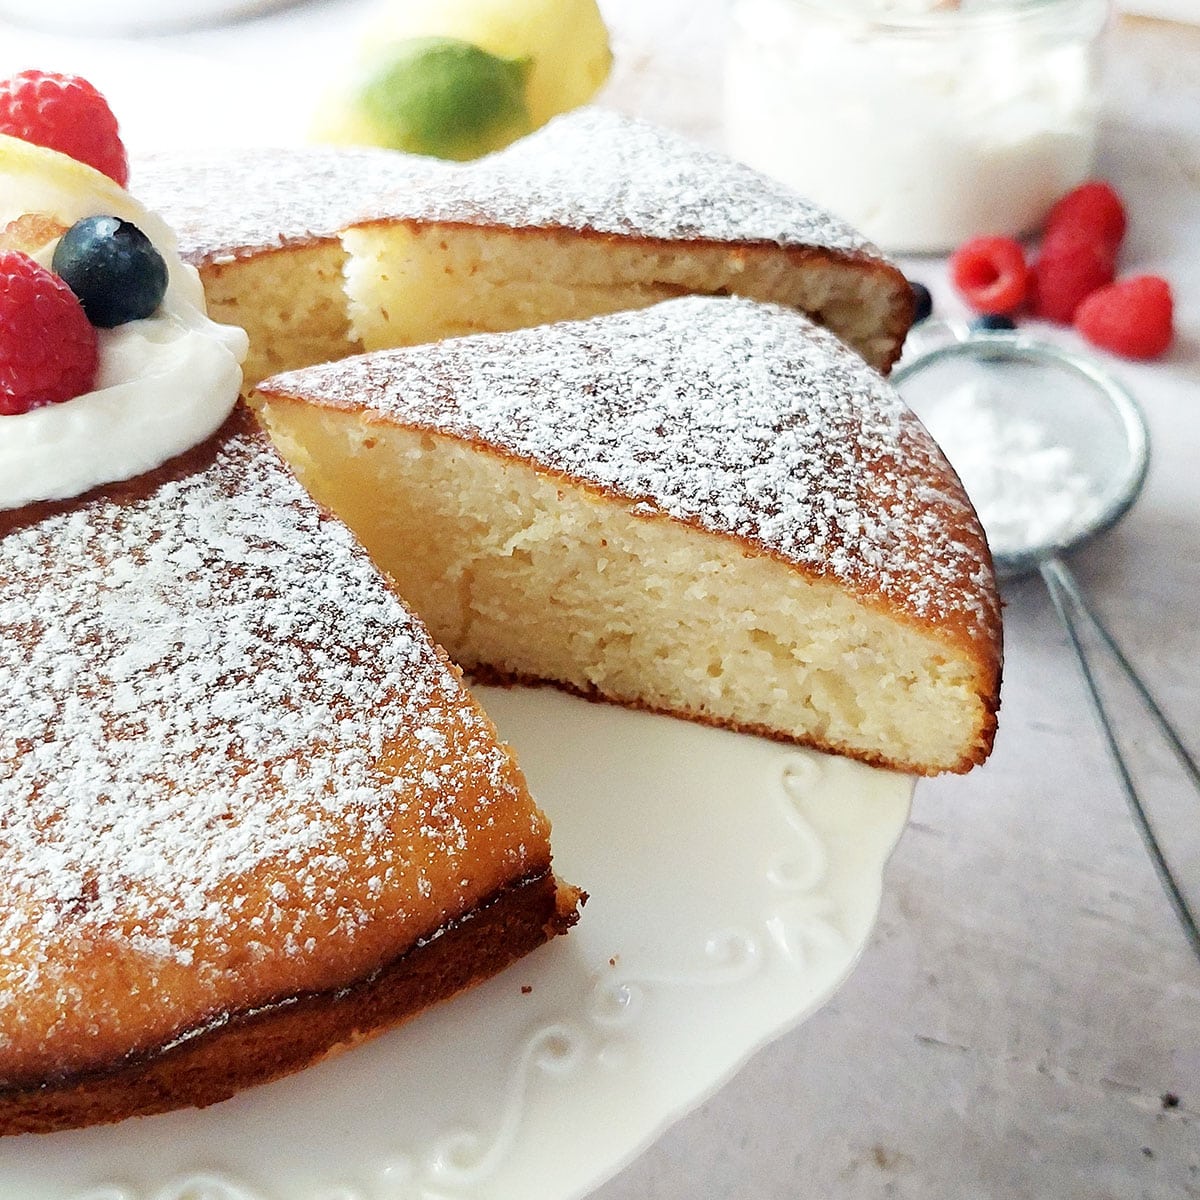 With French yogurt cake you have the freedom to get creative and add your favorite flavorings, frostings, or fillings.